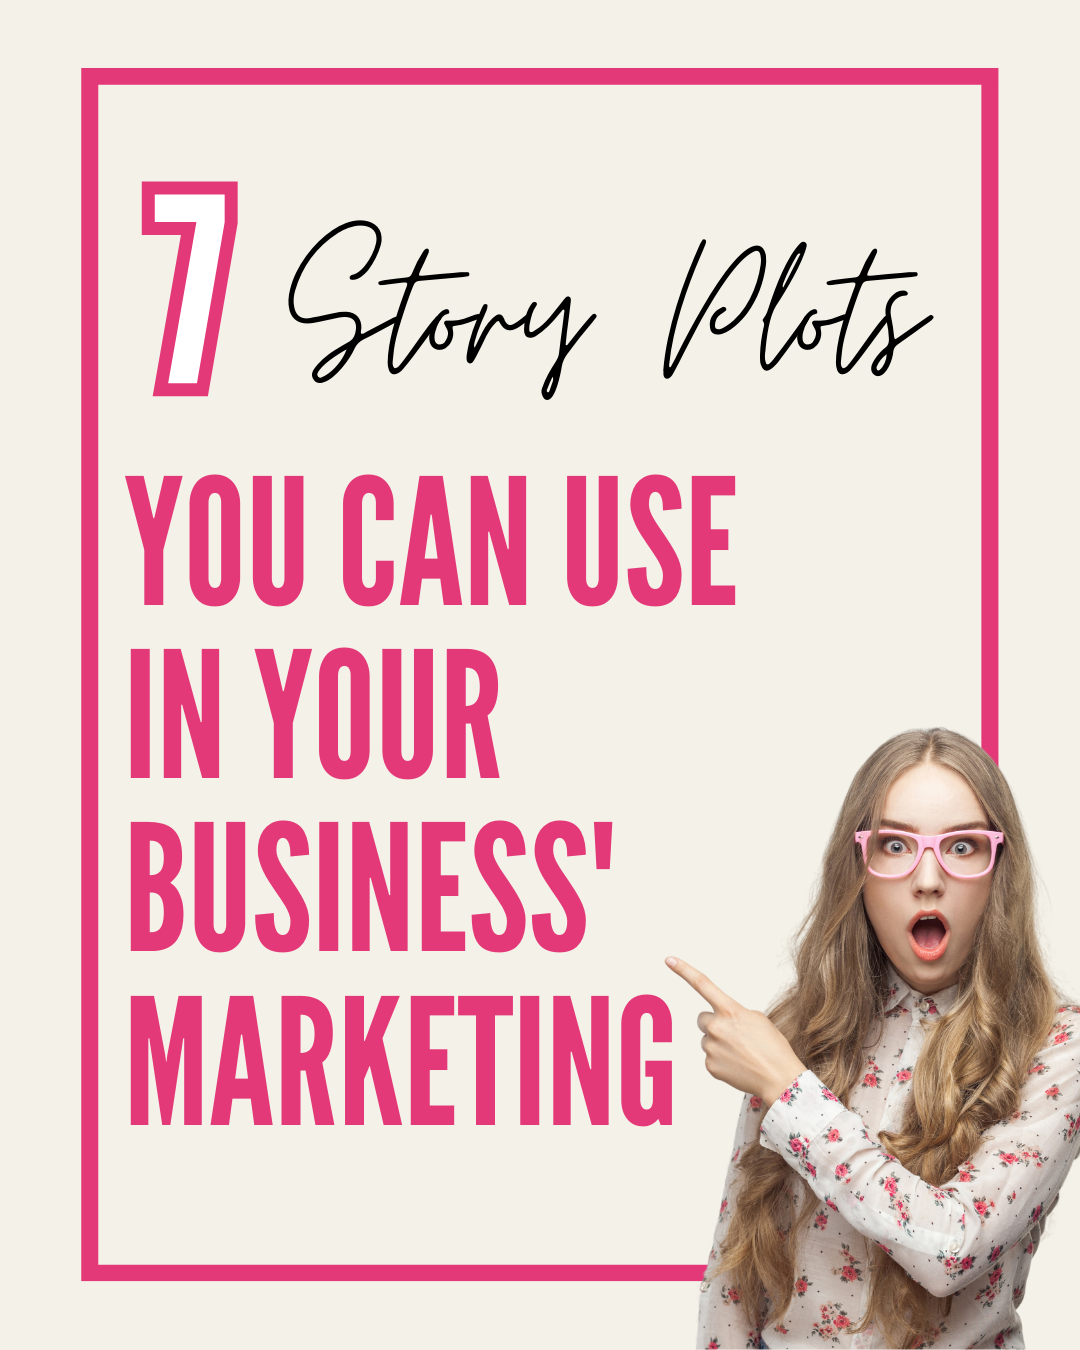 Brand Storytelling: The 7 Story Plots You Can Use in Your Business Marketing